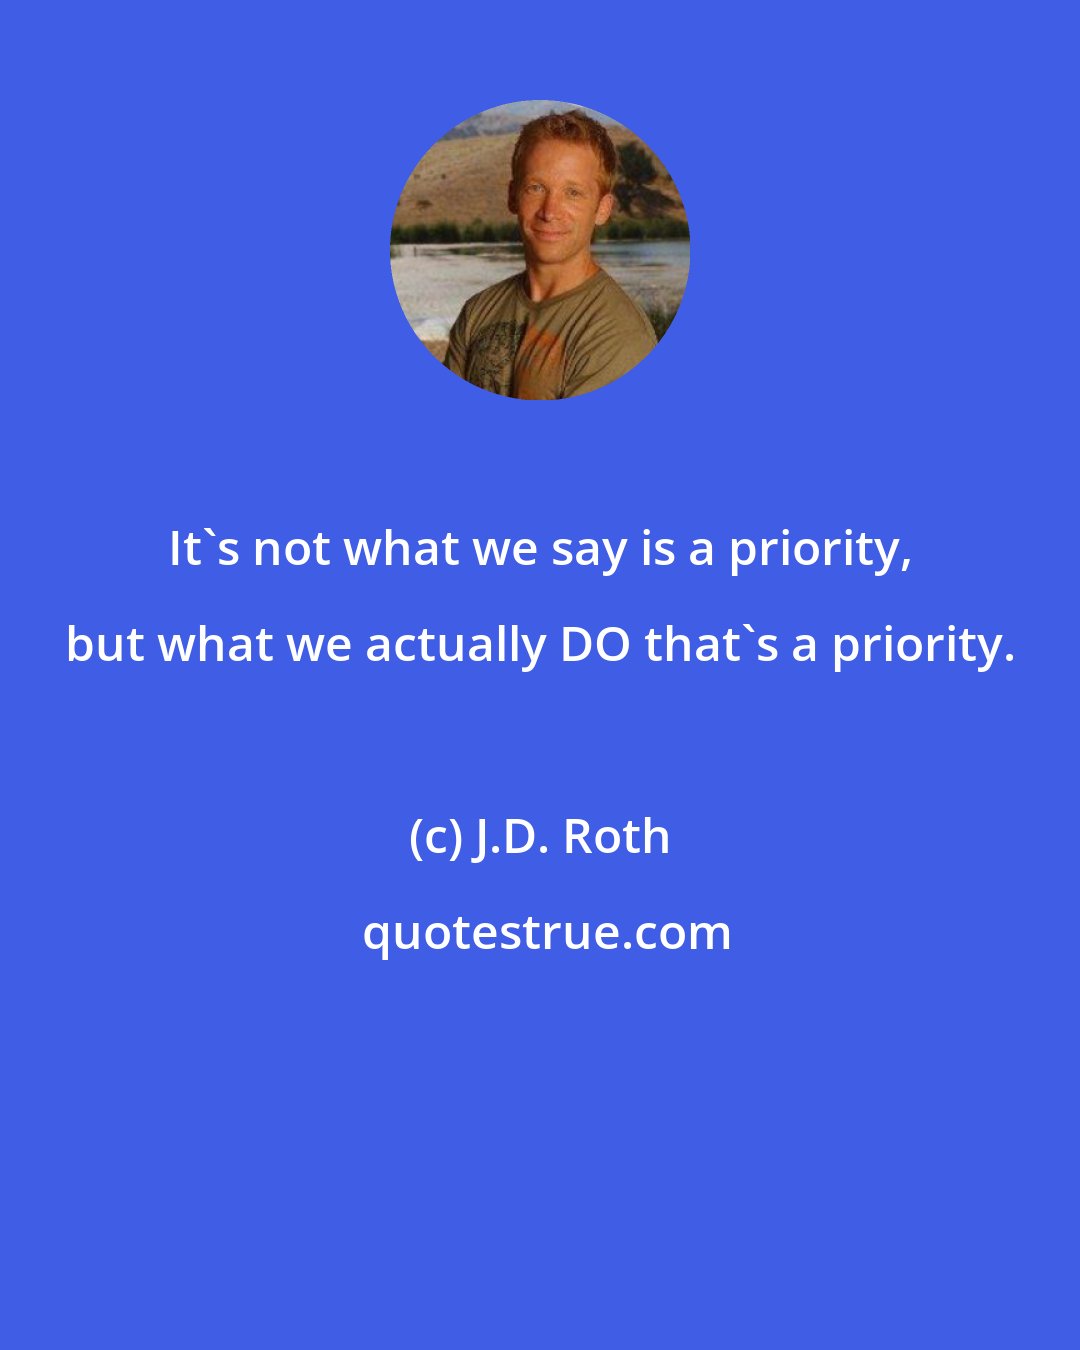 J.D. Roth: It's not what we say is a priority, but what we actually DO that's a priority.